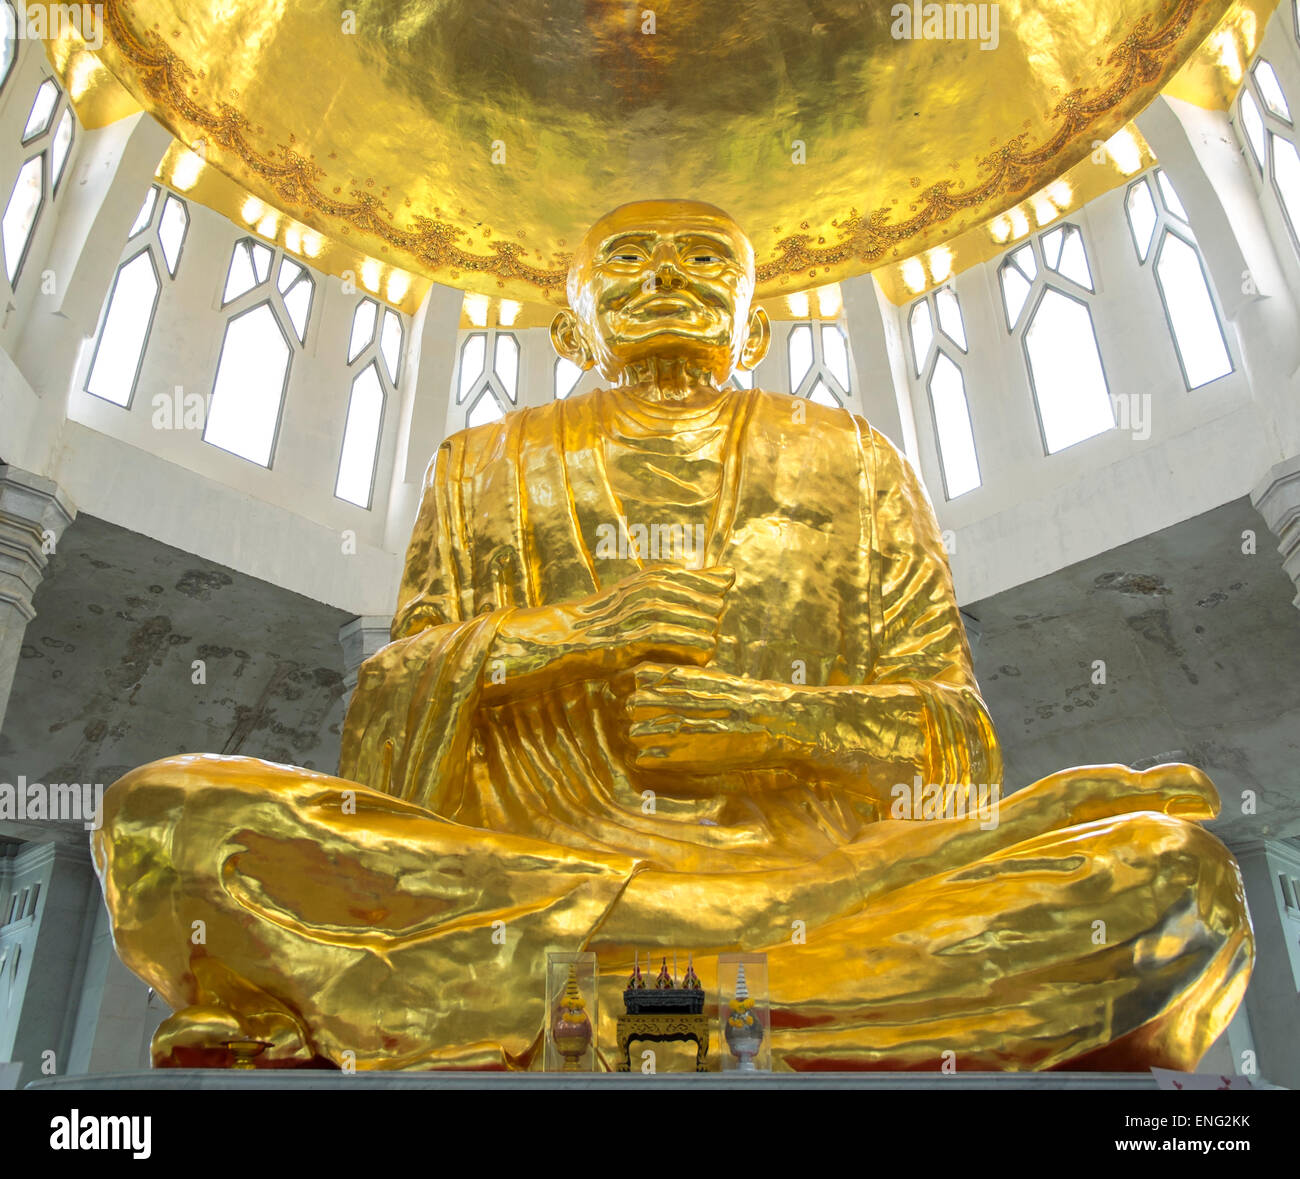 Low angle view of golden Buddha statue in temple, Sikhiu, Nakhon Ratchasima, Thaïlande Banque D'Images